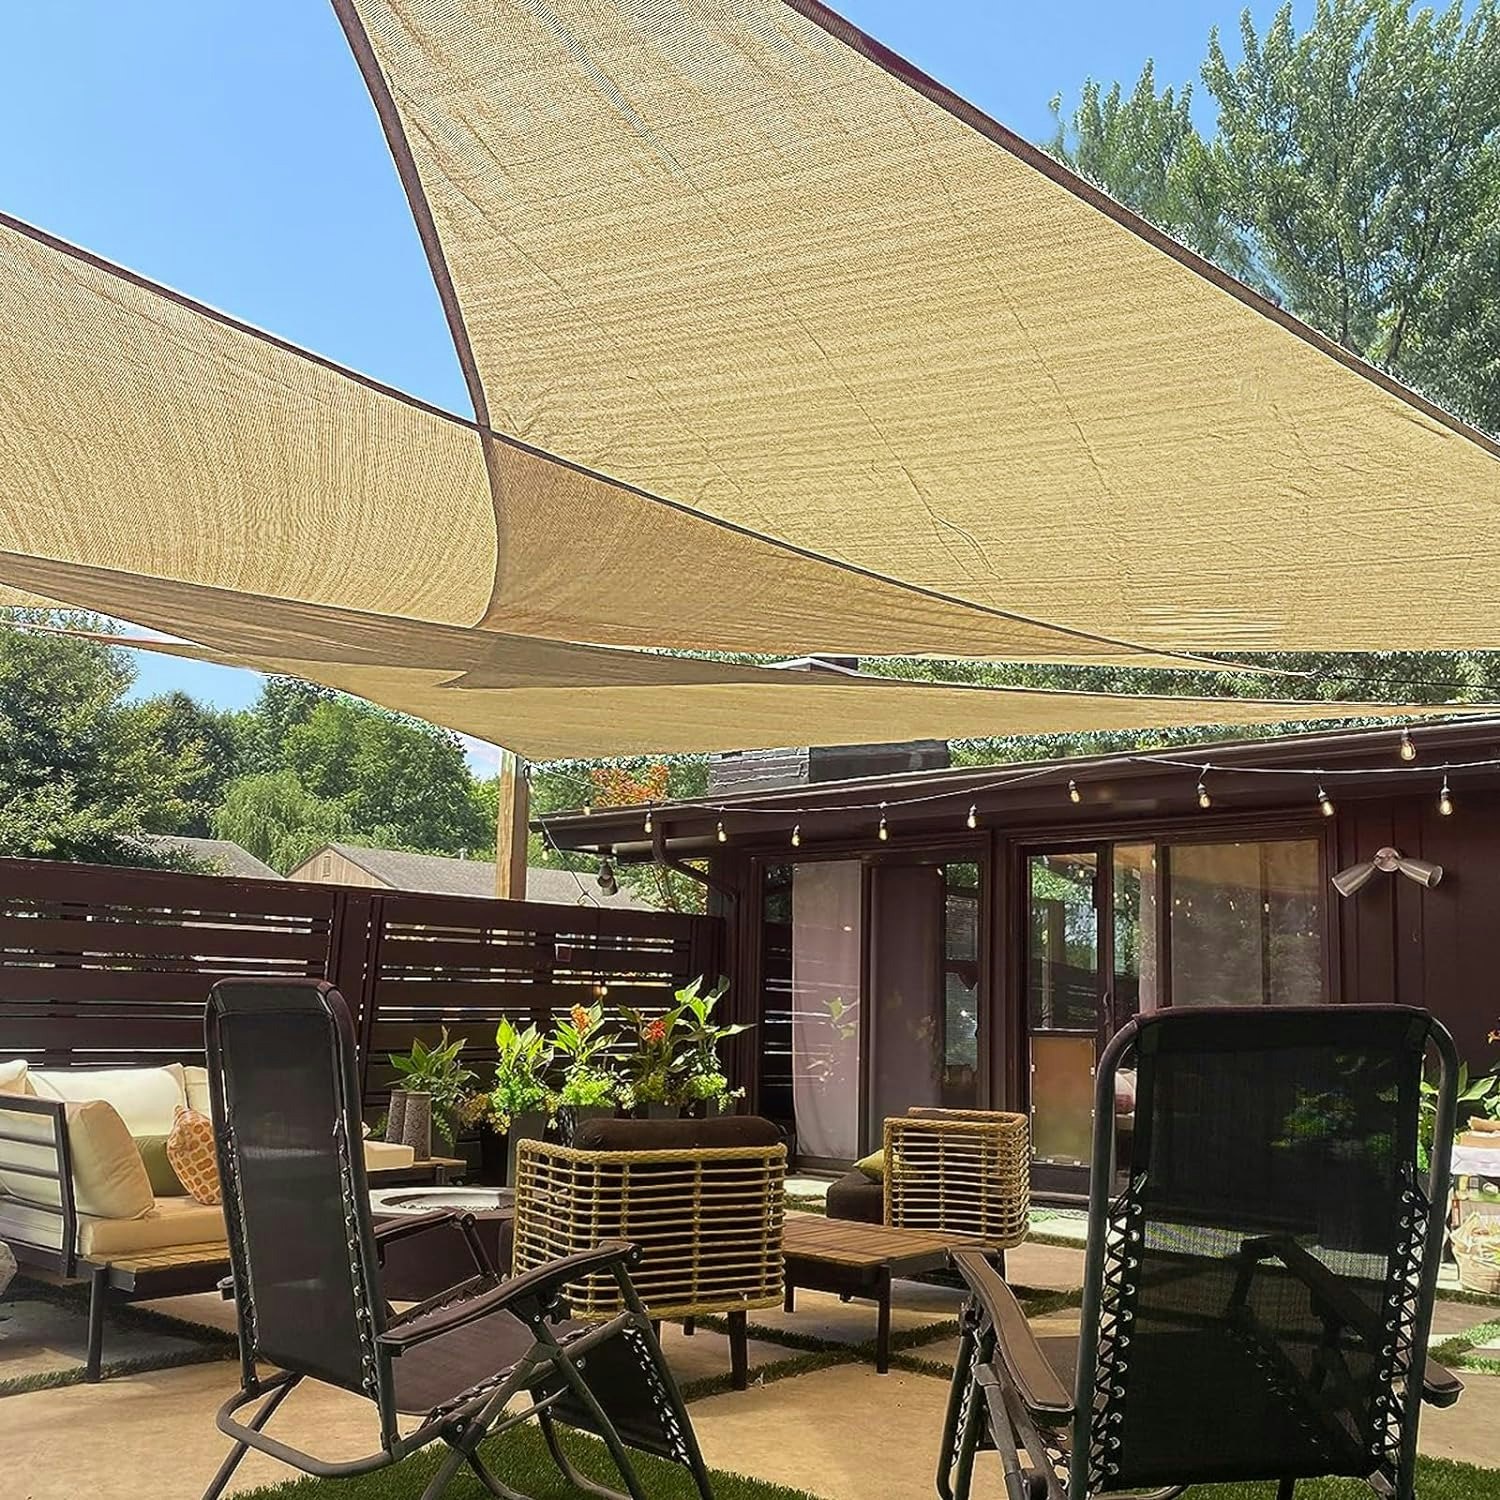 45 Cool Things for Your Backyard That Seem Expensive but Are Cheap AF on Amazon